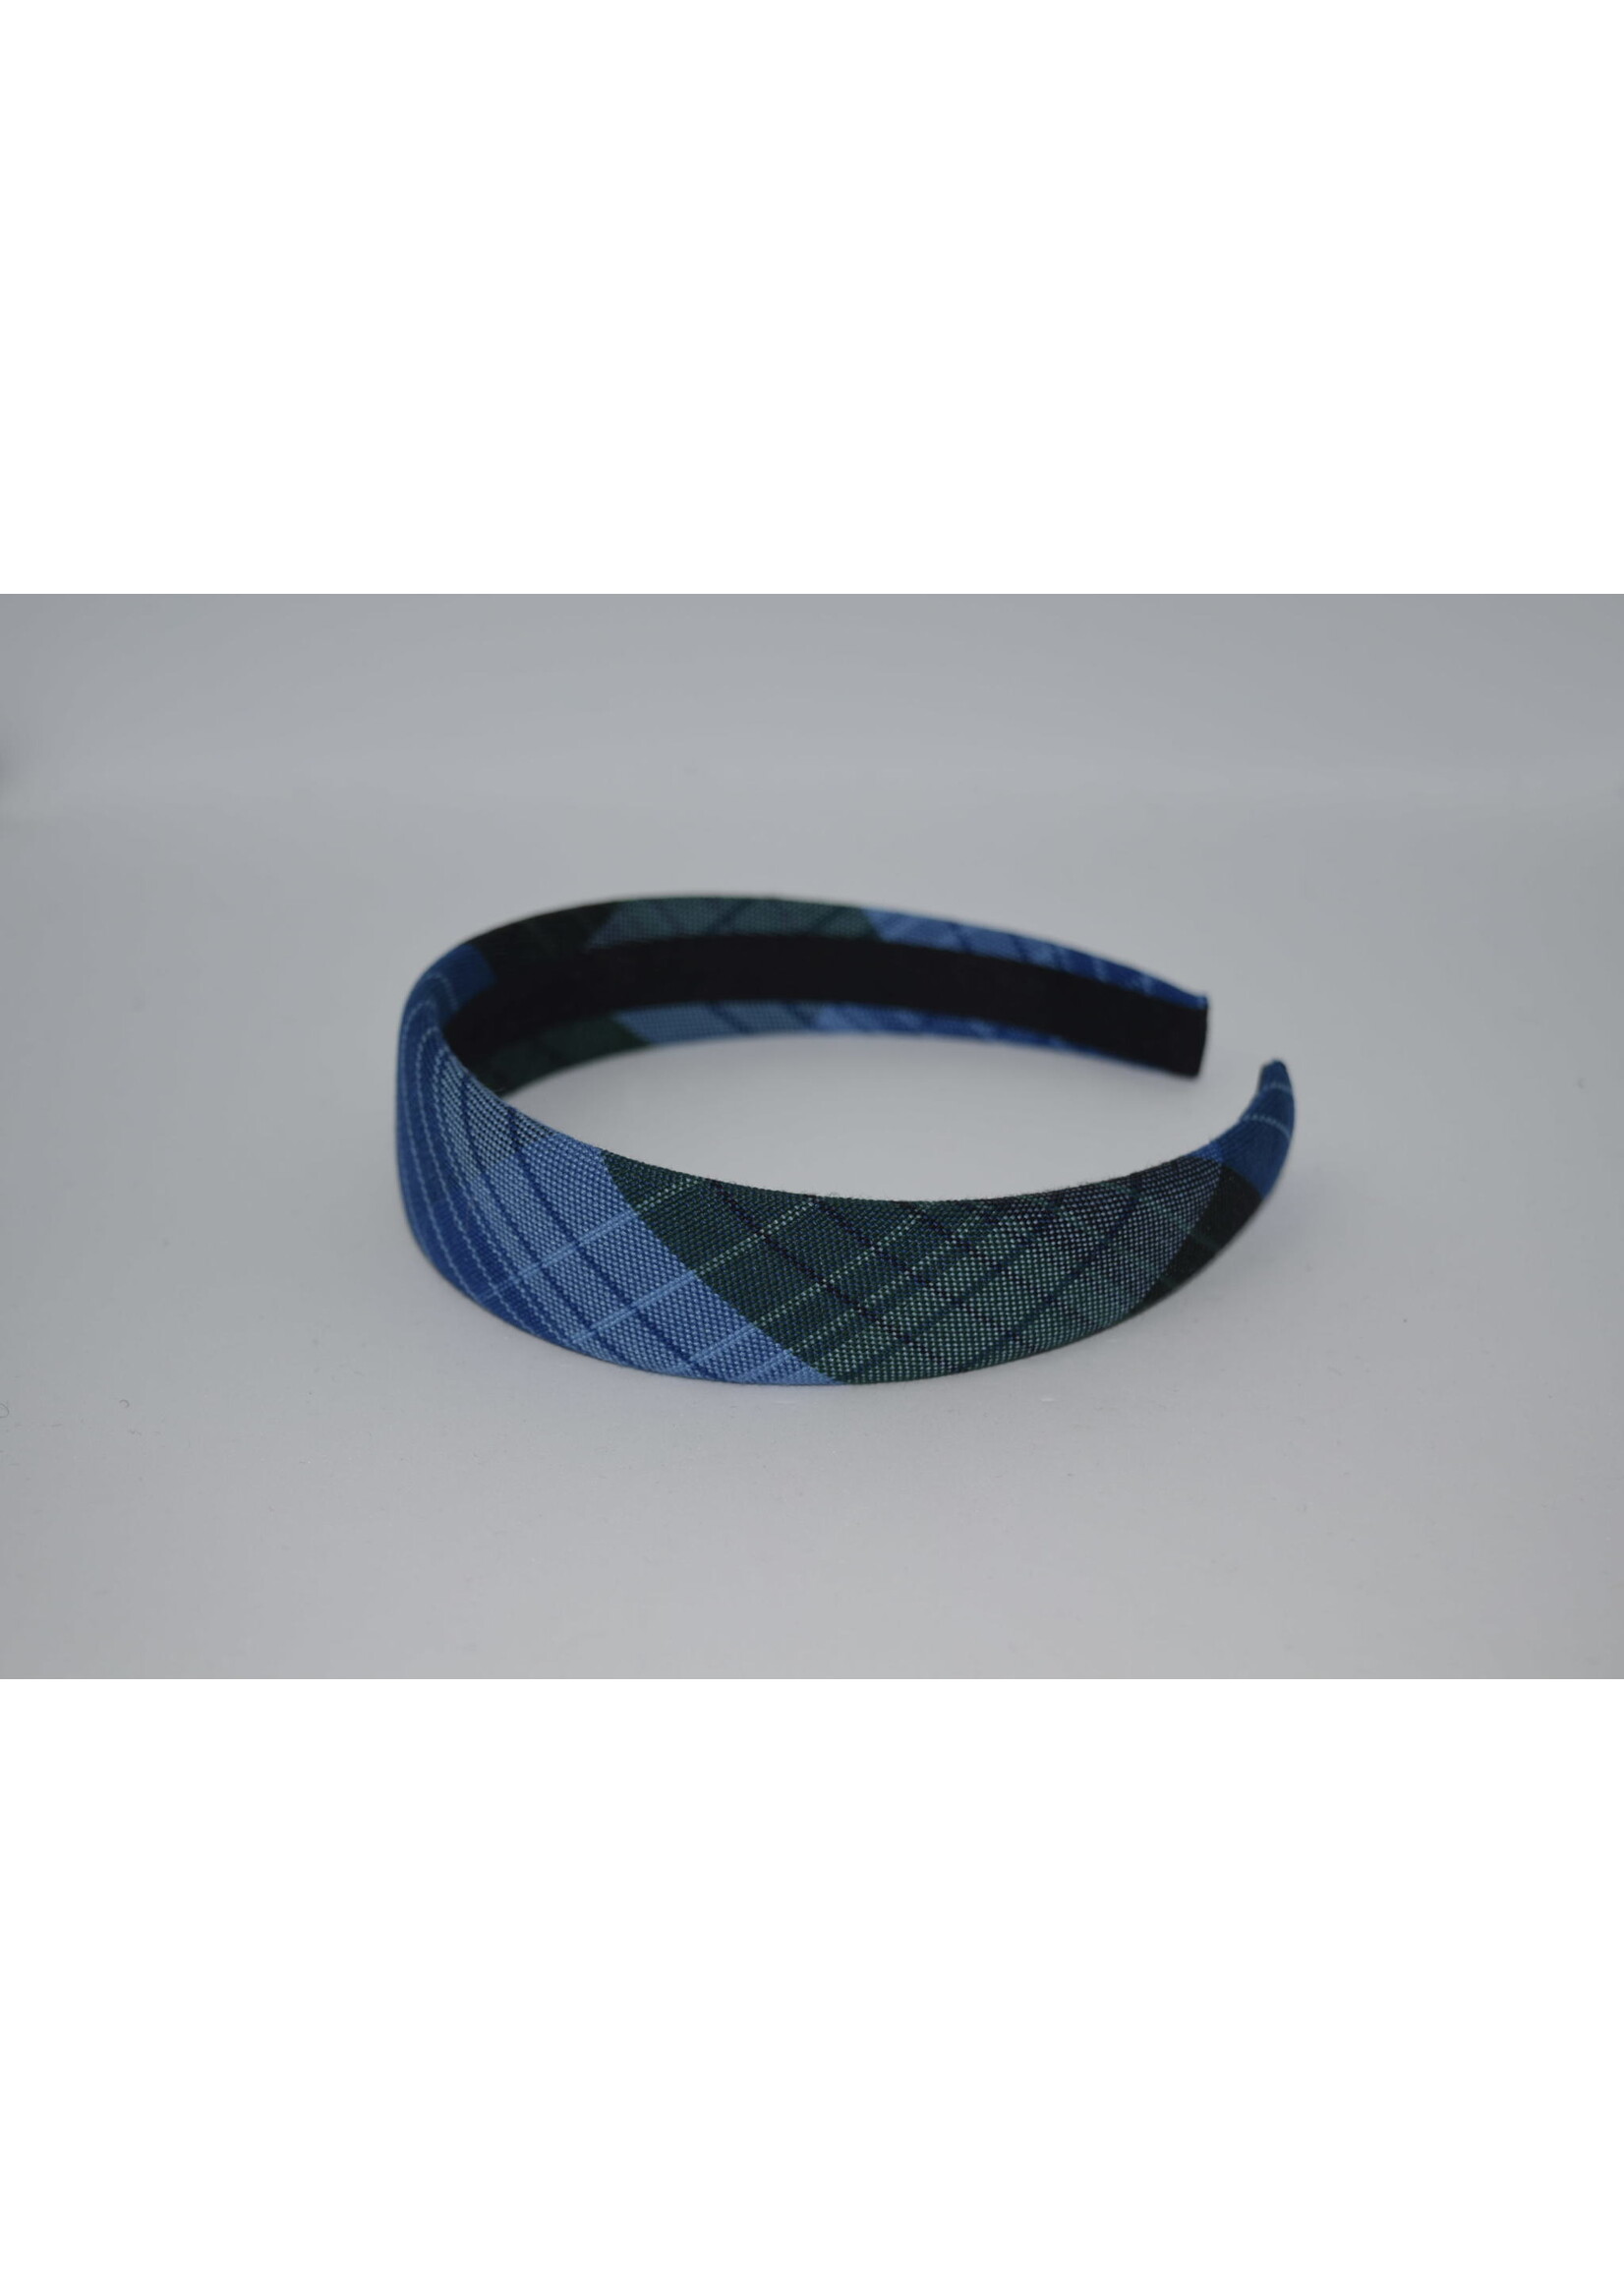 Wide padded headband w/out metal tips P46